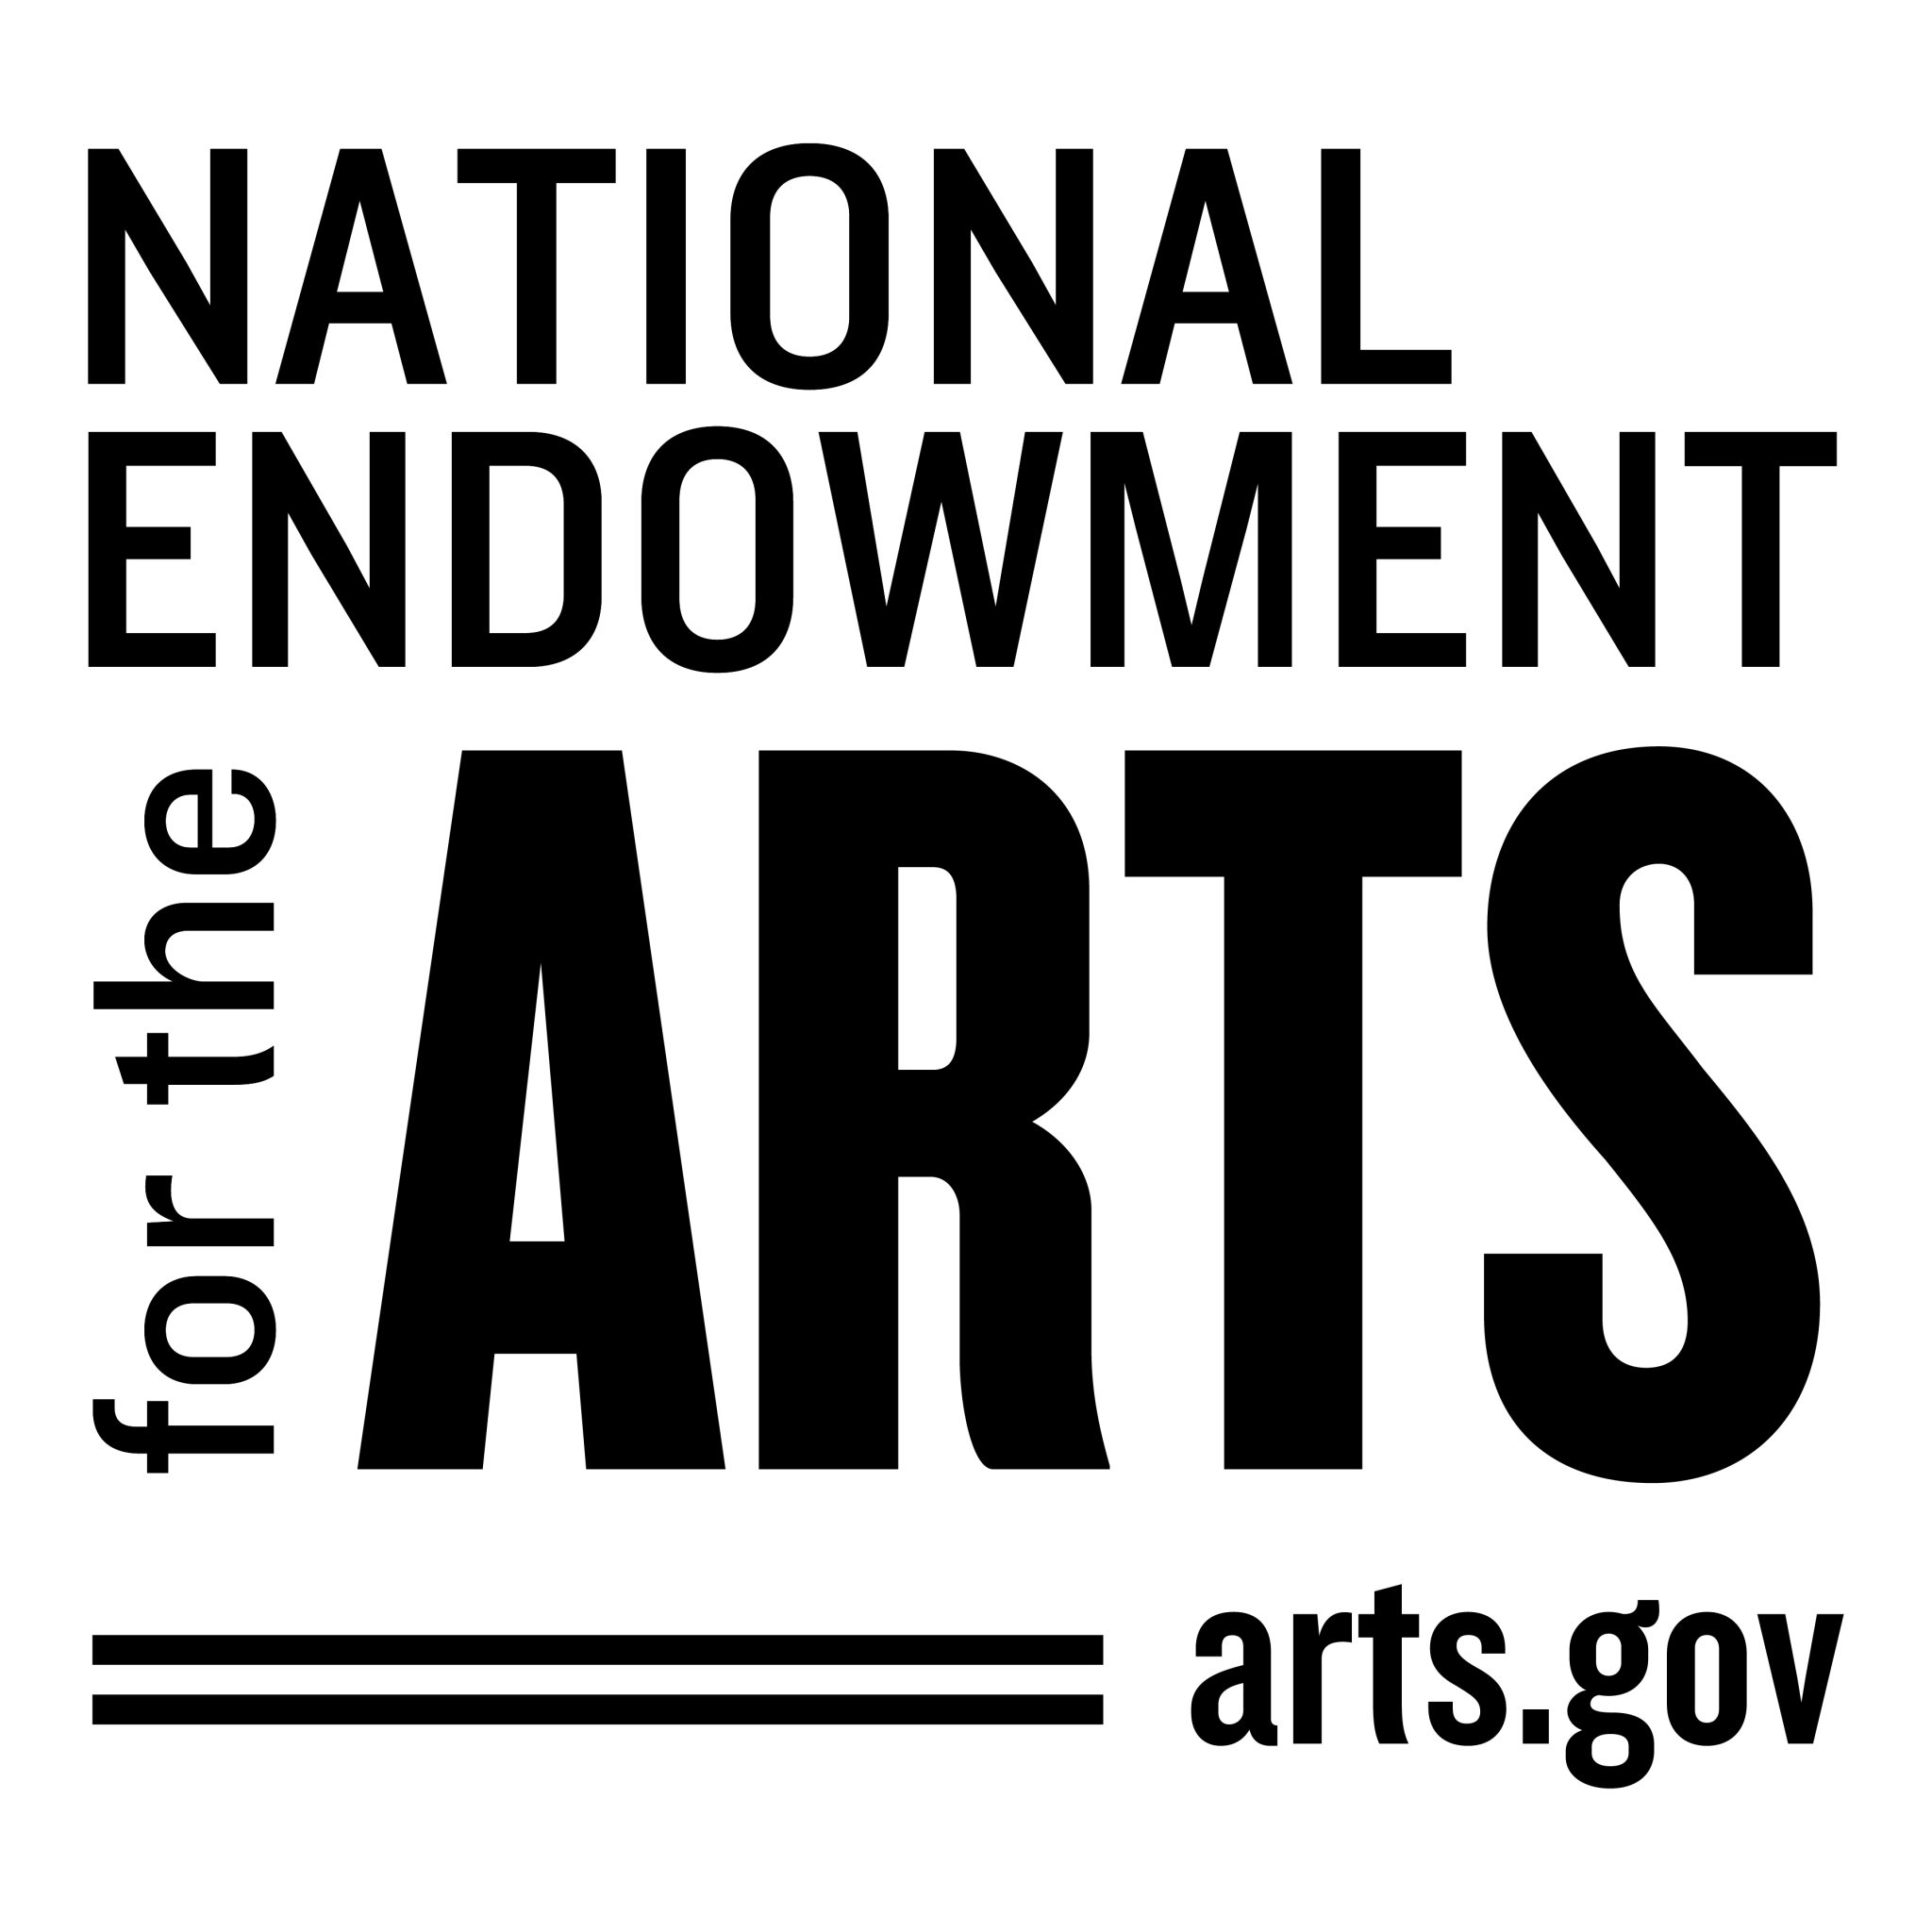 A logo reading "National Endowment for the Arts"